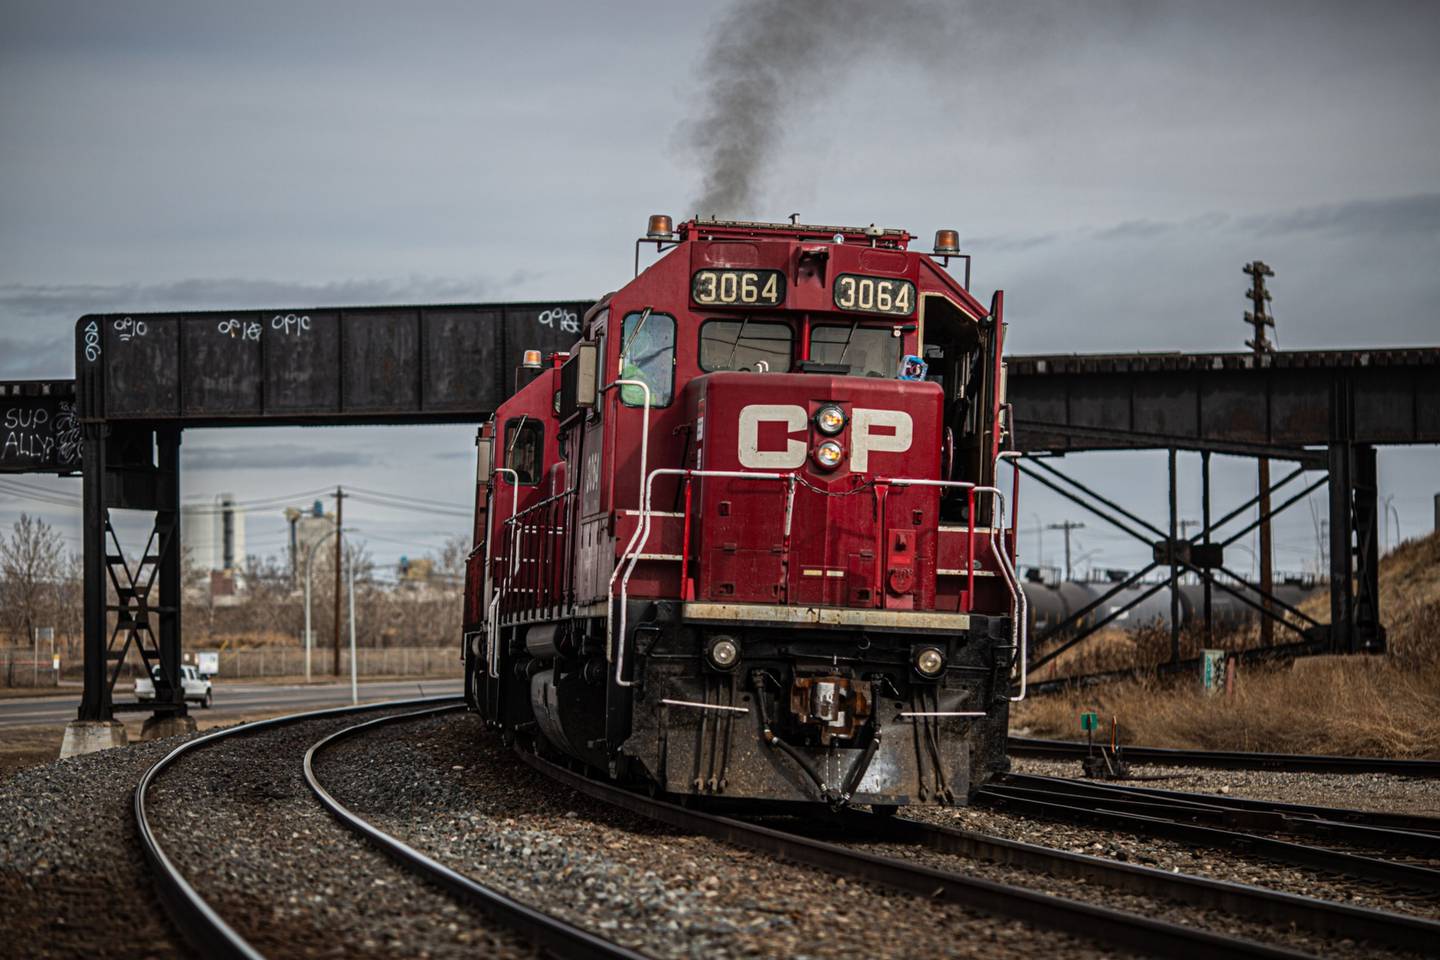 A Canadian Pacific Railway locomotive pulls a train in Calgary, Alberta, Canada, on Monday, March 22, 2021.